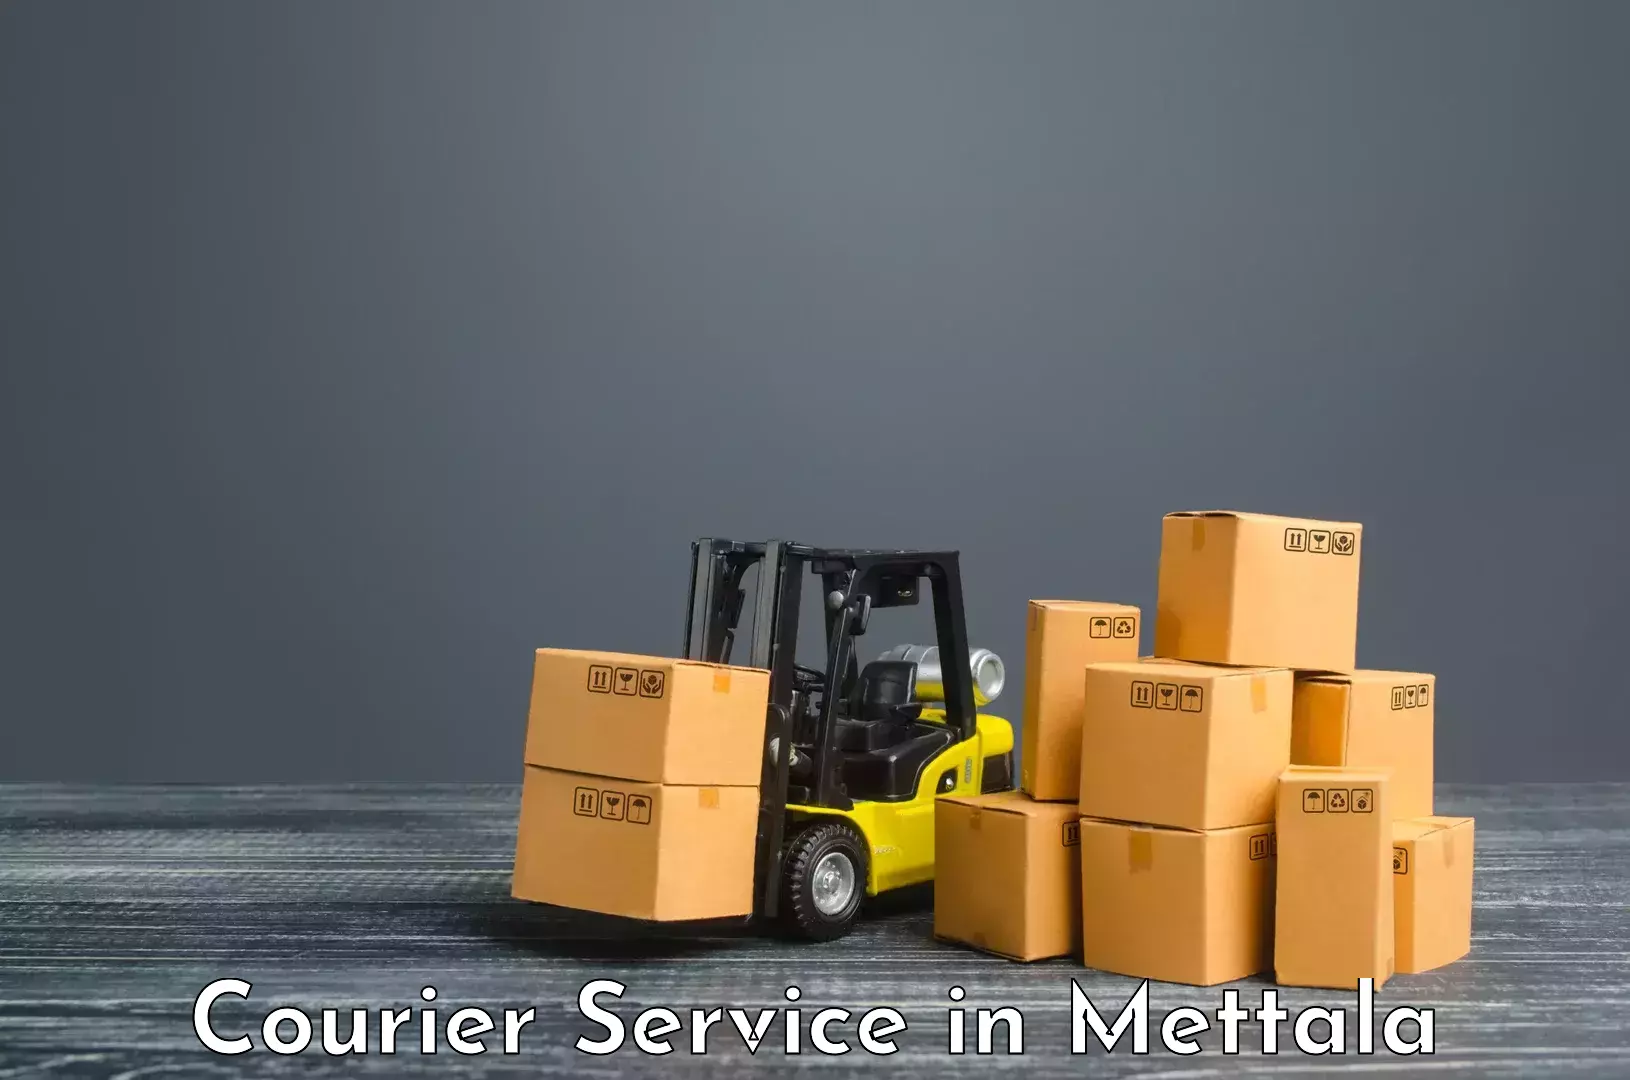 Customer-friendly courier services in Mettala